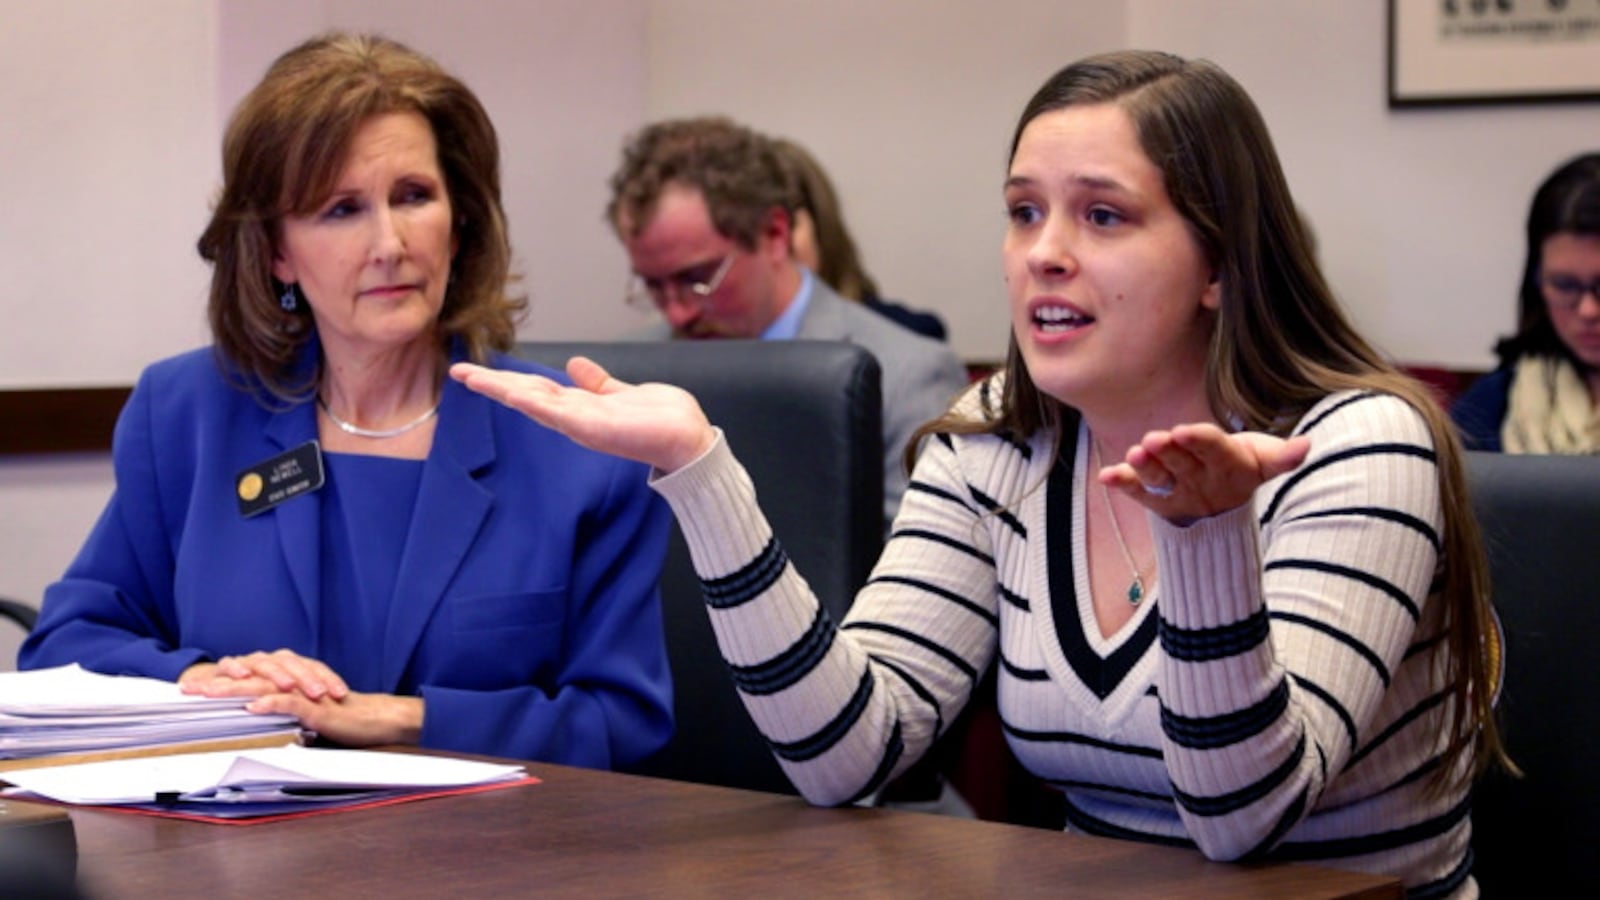 Colorado state Sen. Linda Newell, left, listens to Tori Black, a former foster child, testify at the Colorado state Senate's Finance Committee in favor of the "Fostering Connections" bill sponsored by Newell on Feb. 24, 2015. The bill failed to move out of the committee, 3-2.